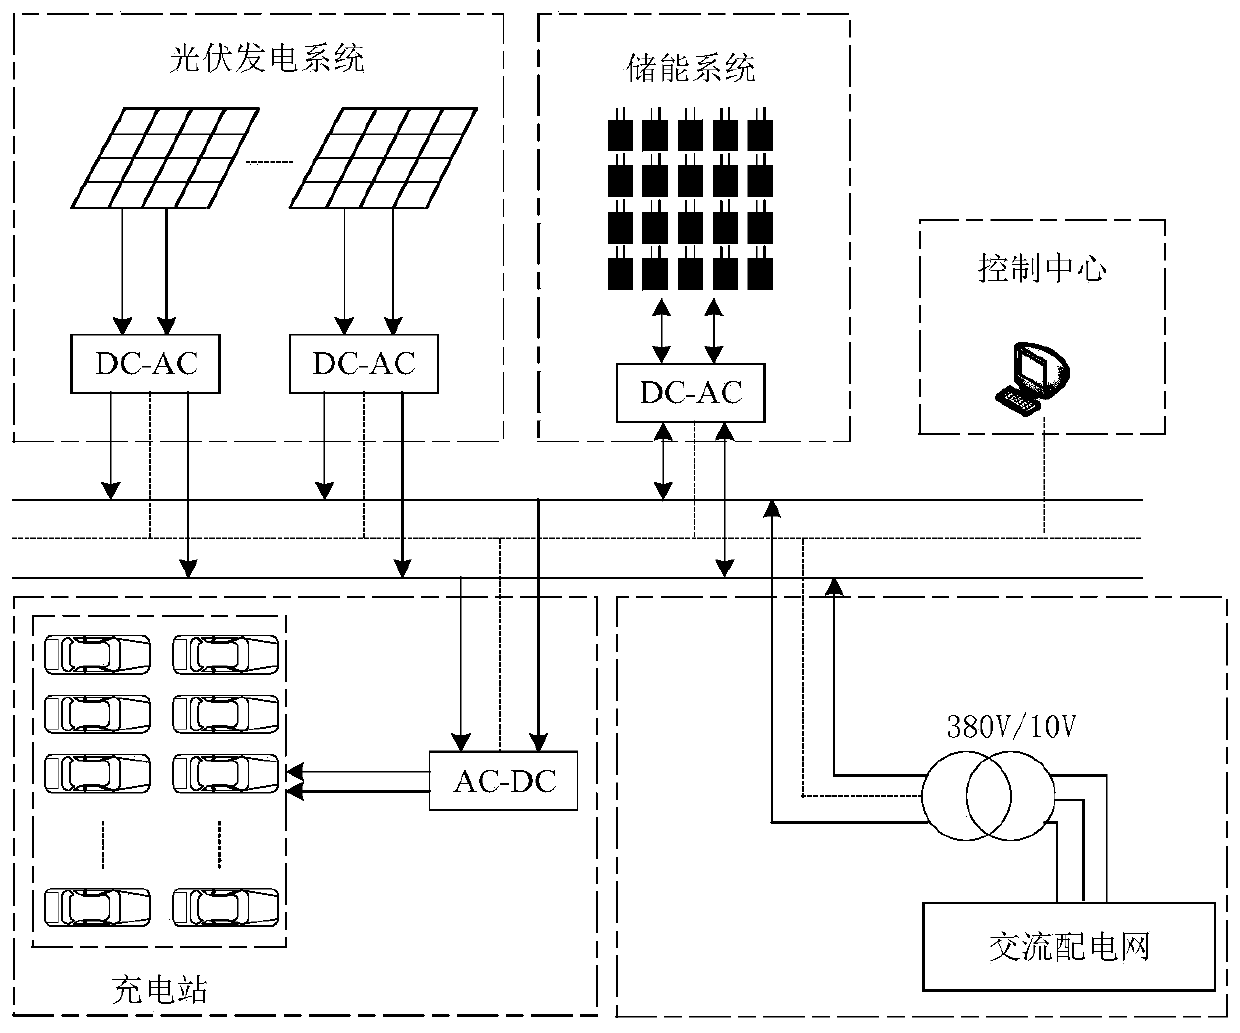 Electric vehicle photovoltaic charging station optimization scheduling method considering user behavior